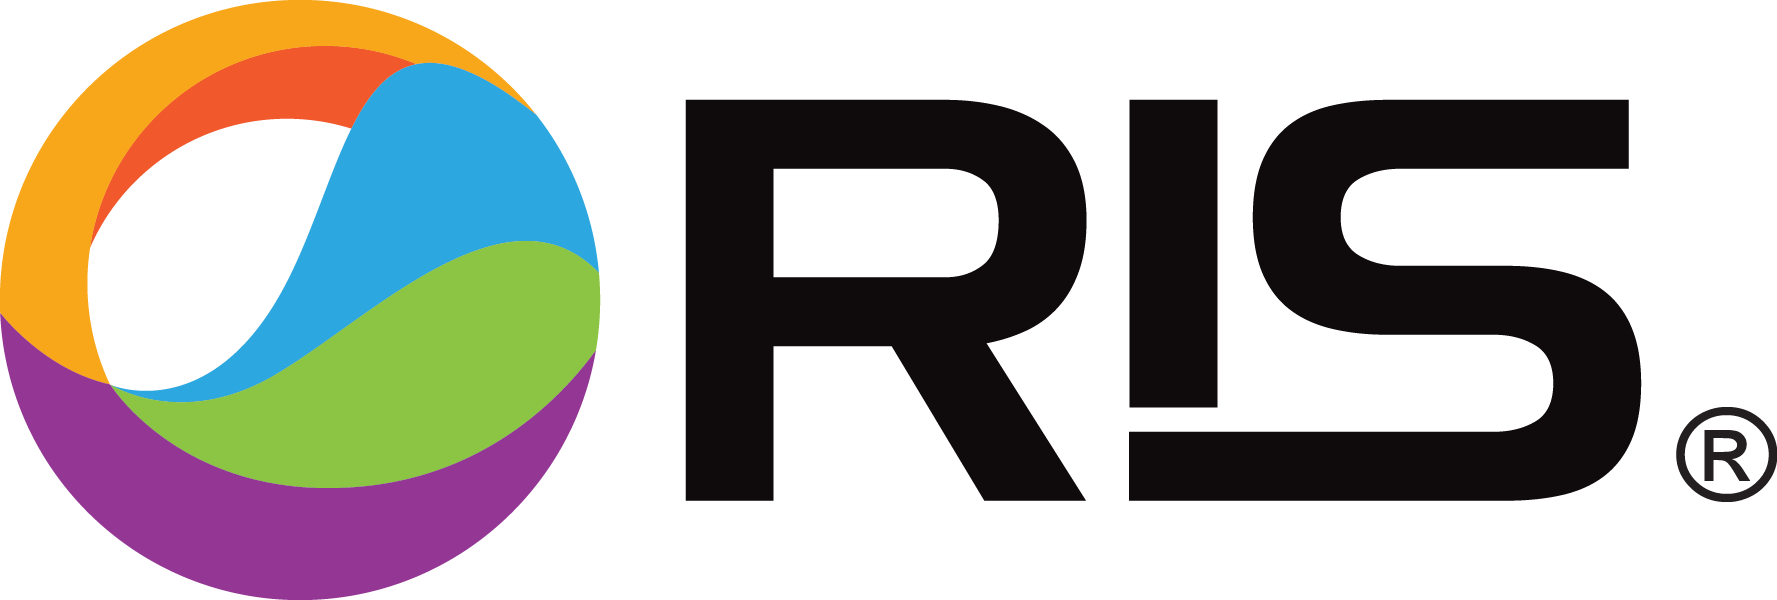 RIS Logo with Text and Registerd Trademark v2